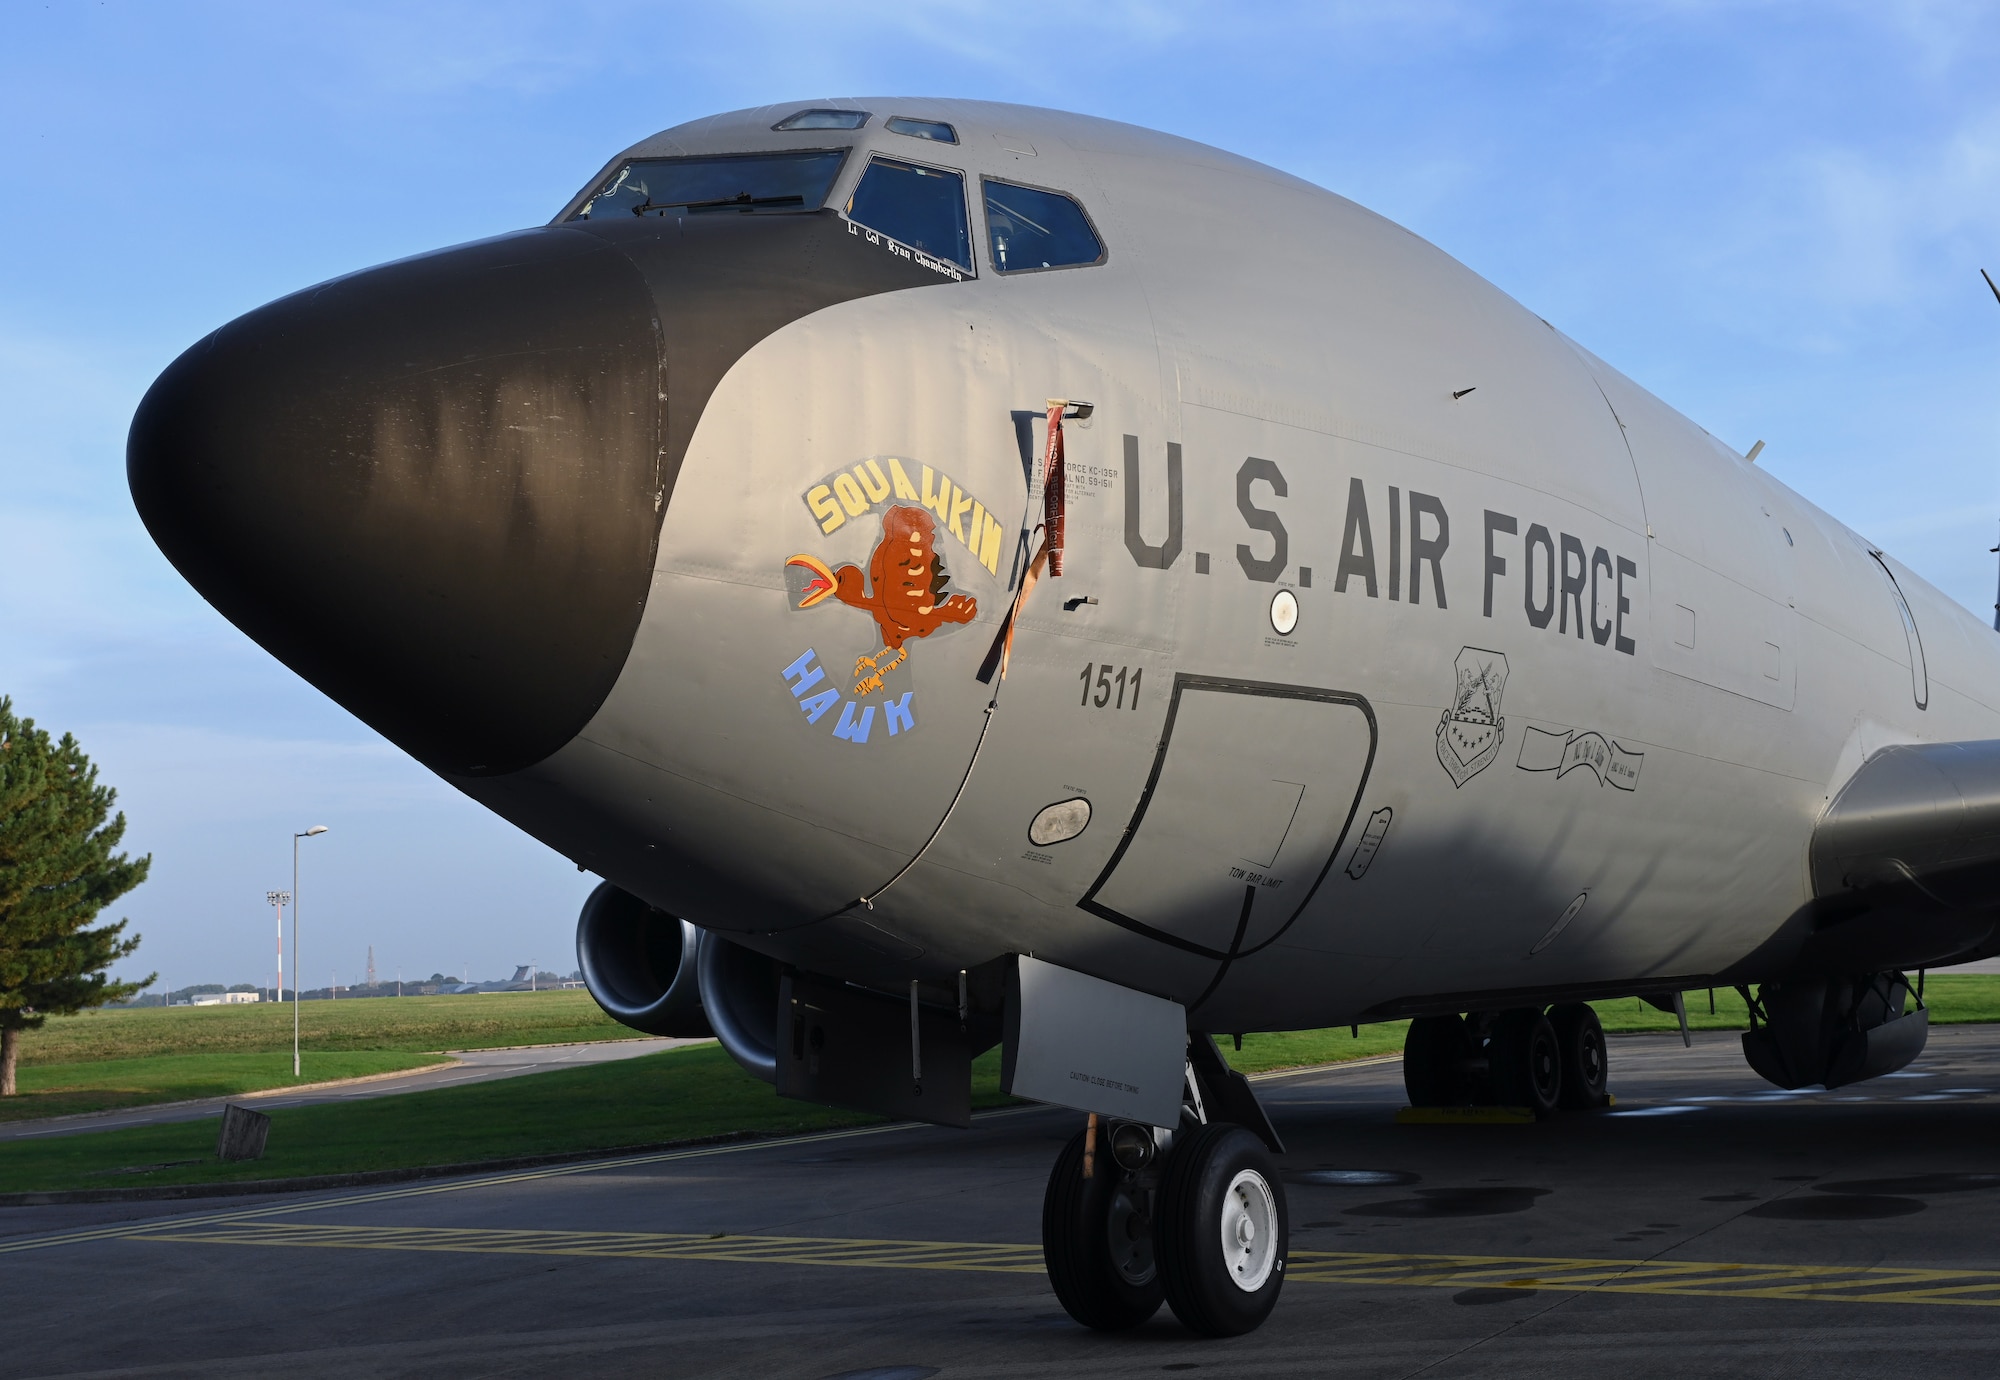 One of the two newest additions to the 100th Air Refueling Wing’s KC-135 Stratotankers bearing its heritage nose art, “Squawkin Hawk,” is displayed for all to see after being unveiled during a nose art dedication ceremony at Royal Air Force Mildenhall, England, Oct. 10, 2023. Family members of two of the original crew members from the World War II B-17 Flying Fortress of the same name, attended the ceremony and shared memories and stories about their 100th Bomb Group connections. (U.S. Air Force photo by Karen Abeyasekere)